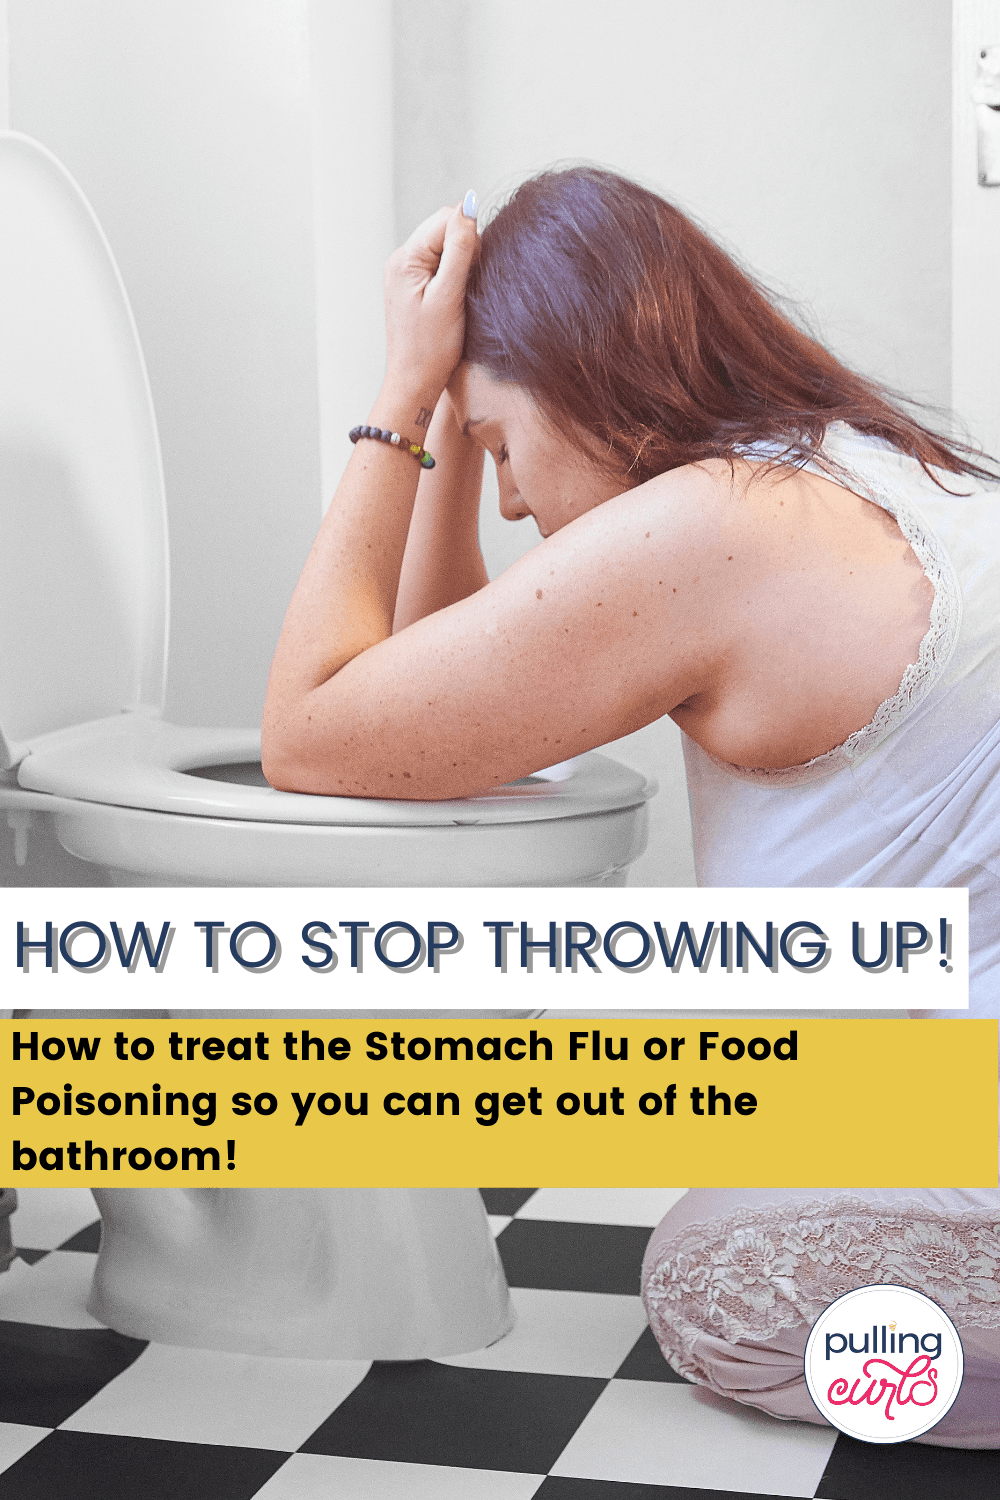 How do you get over the stomach flu fast? via @pullingcurls